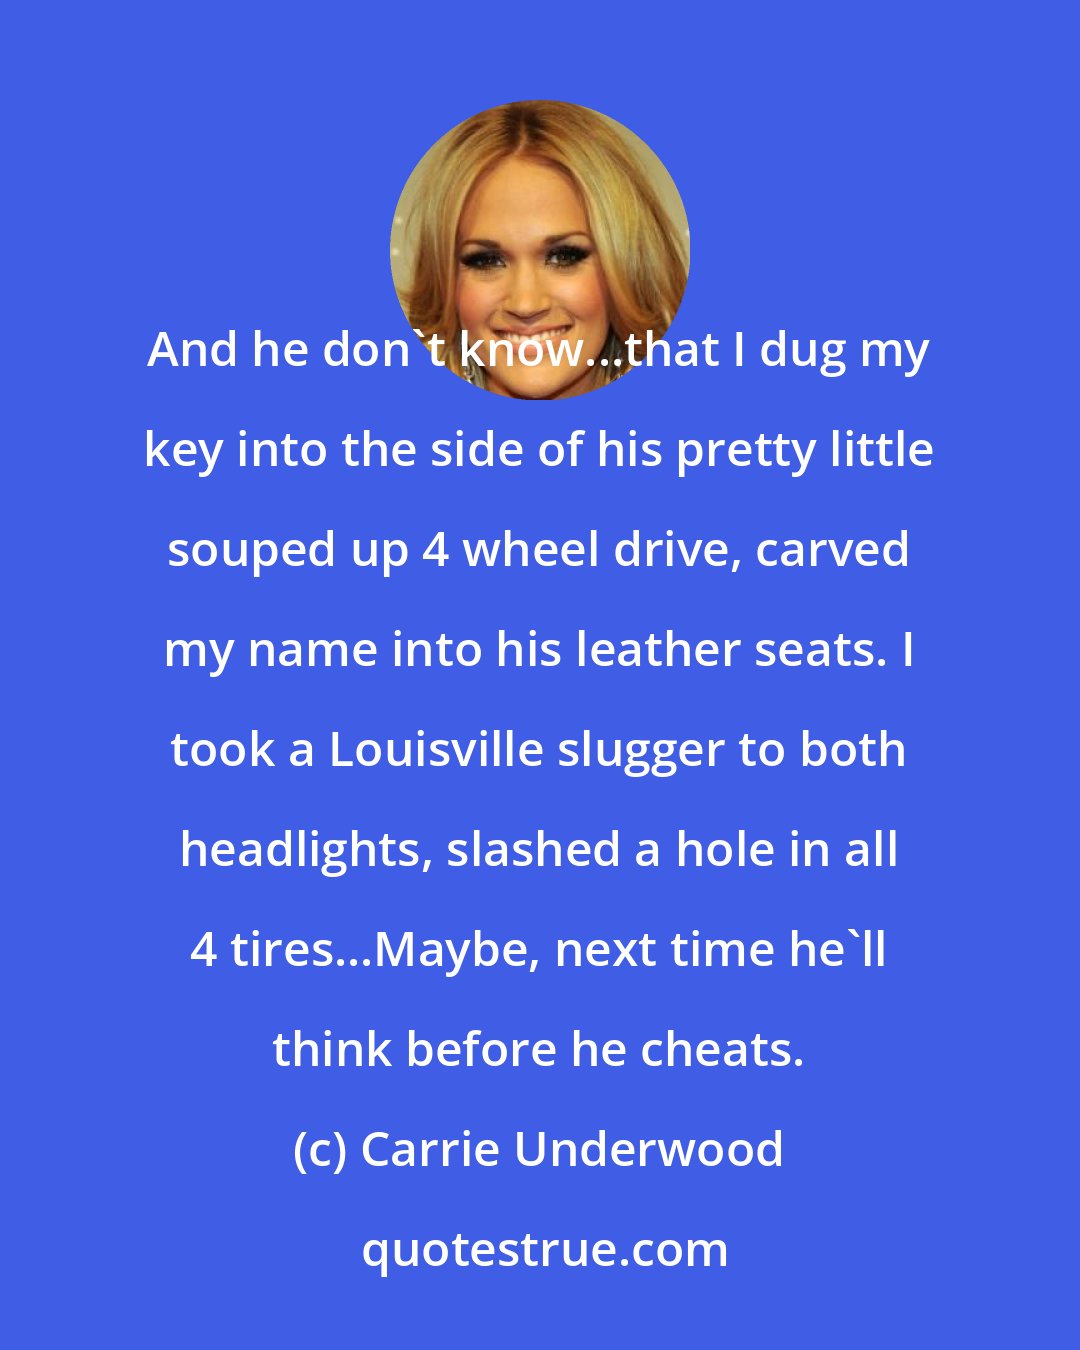 Carrie Underwood: And he don't know...that I dug my key into the side of his pretty little souped up 4 wheel drive, carved my name into his leather seats. I took a Louisville slugger to both headlights, slashed a hole in all 4 tires...Maybe, next time he'll think before he cheats.